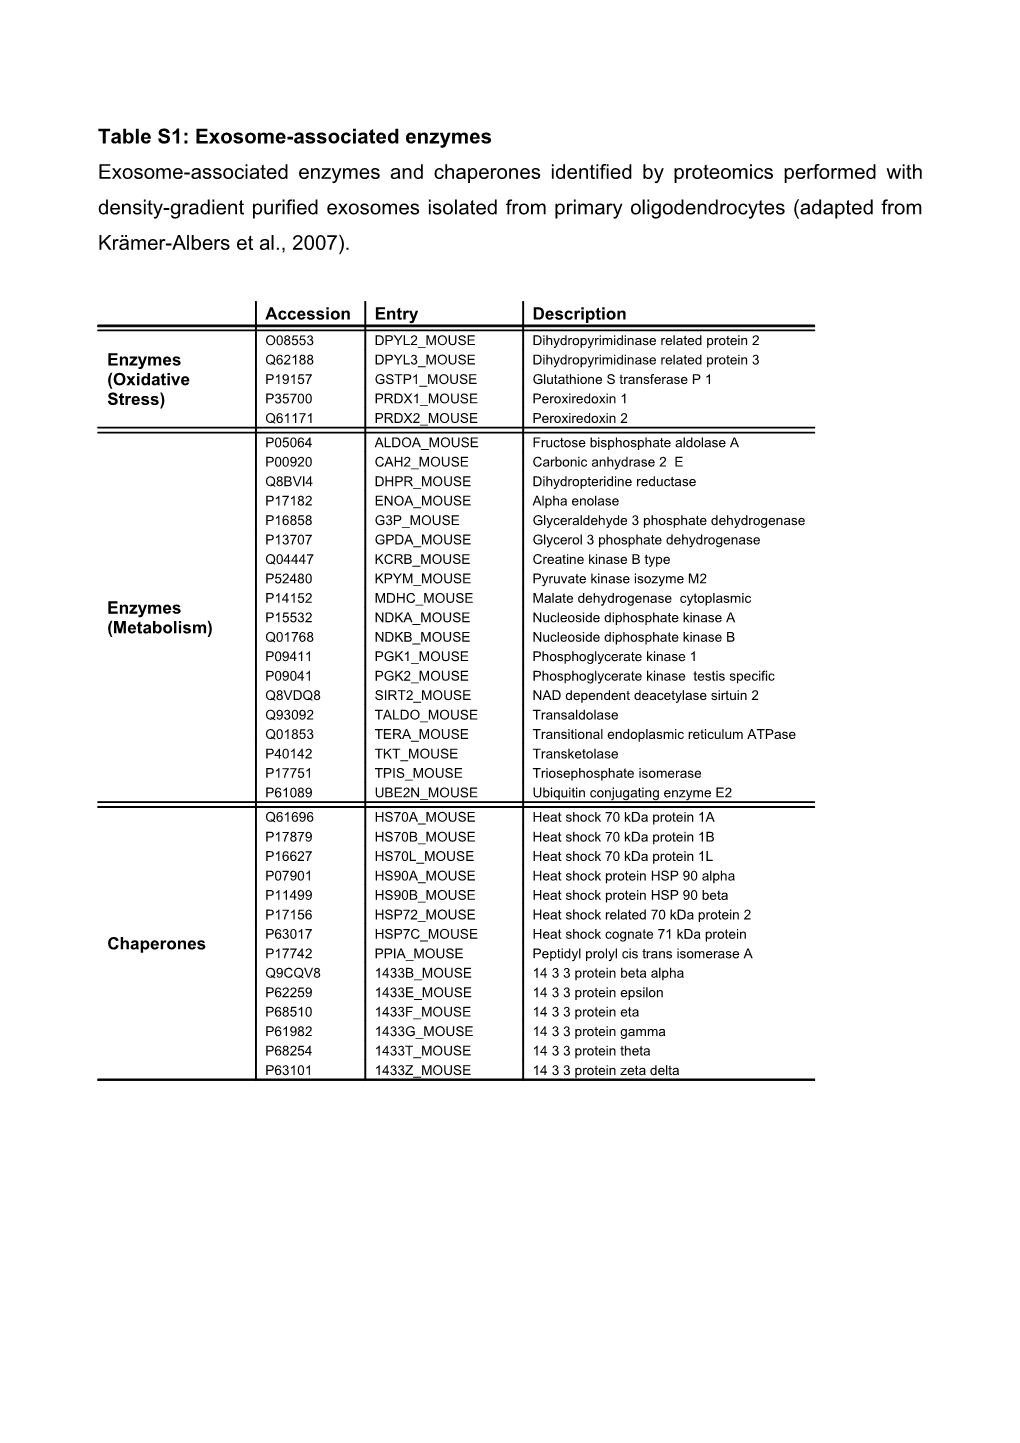 Table S1: Exosome-Associated Enzymes